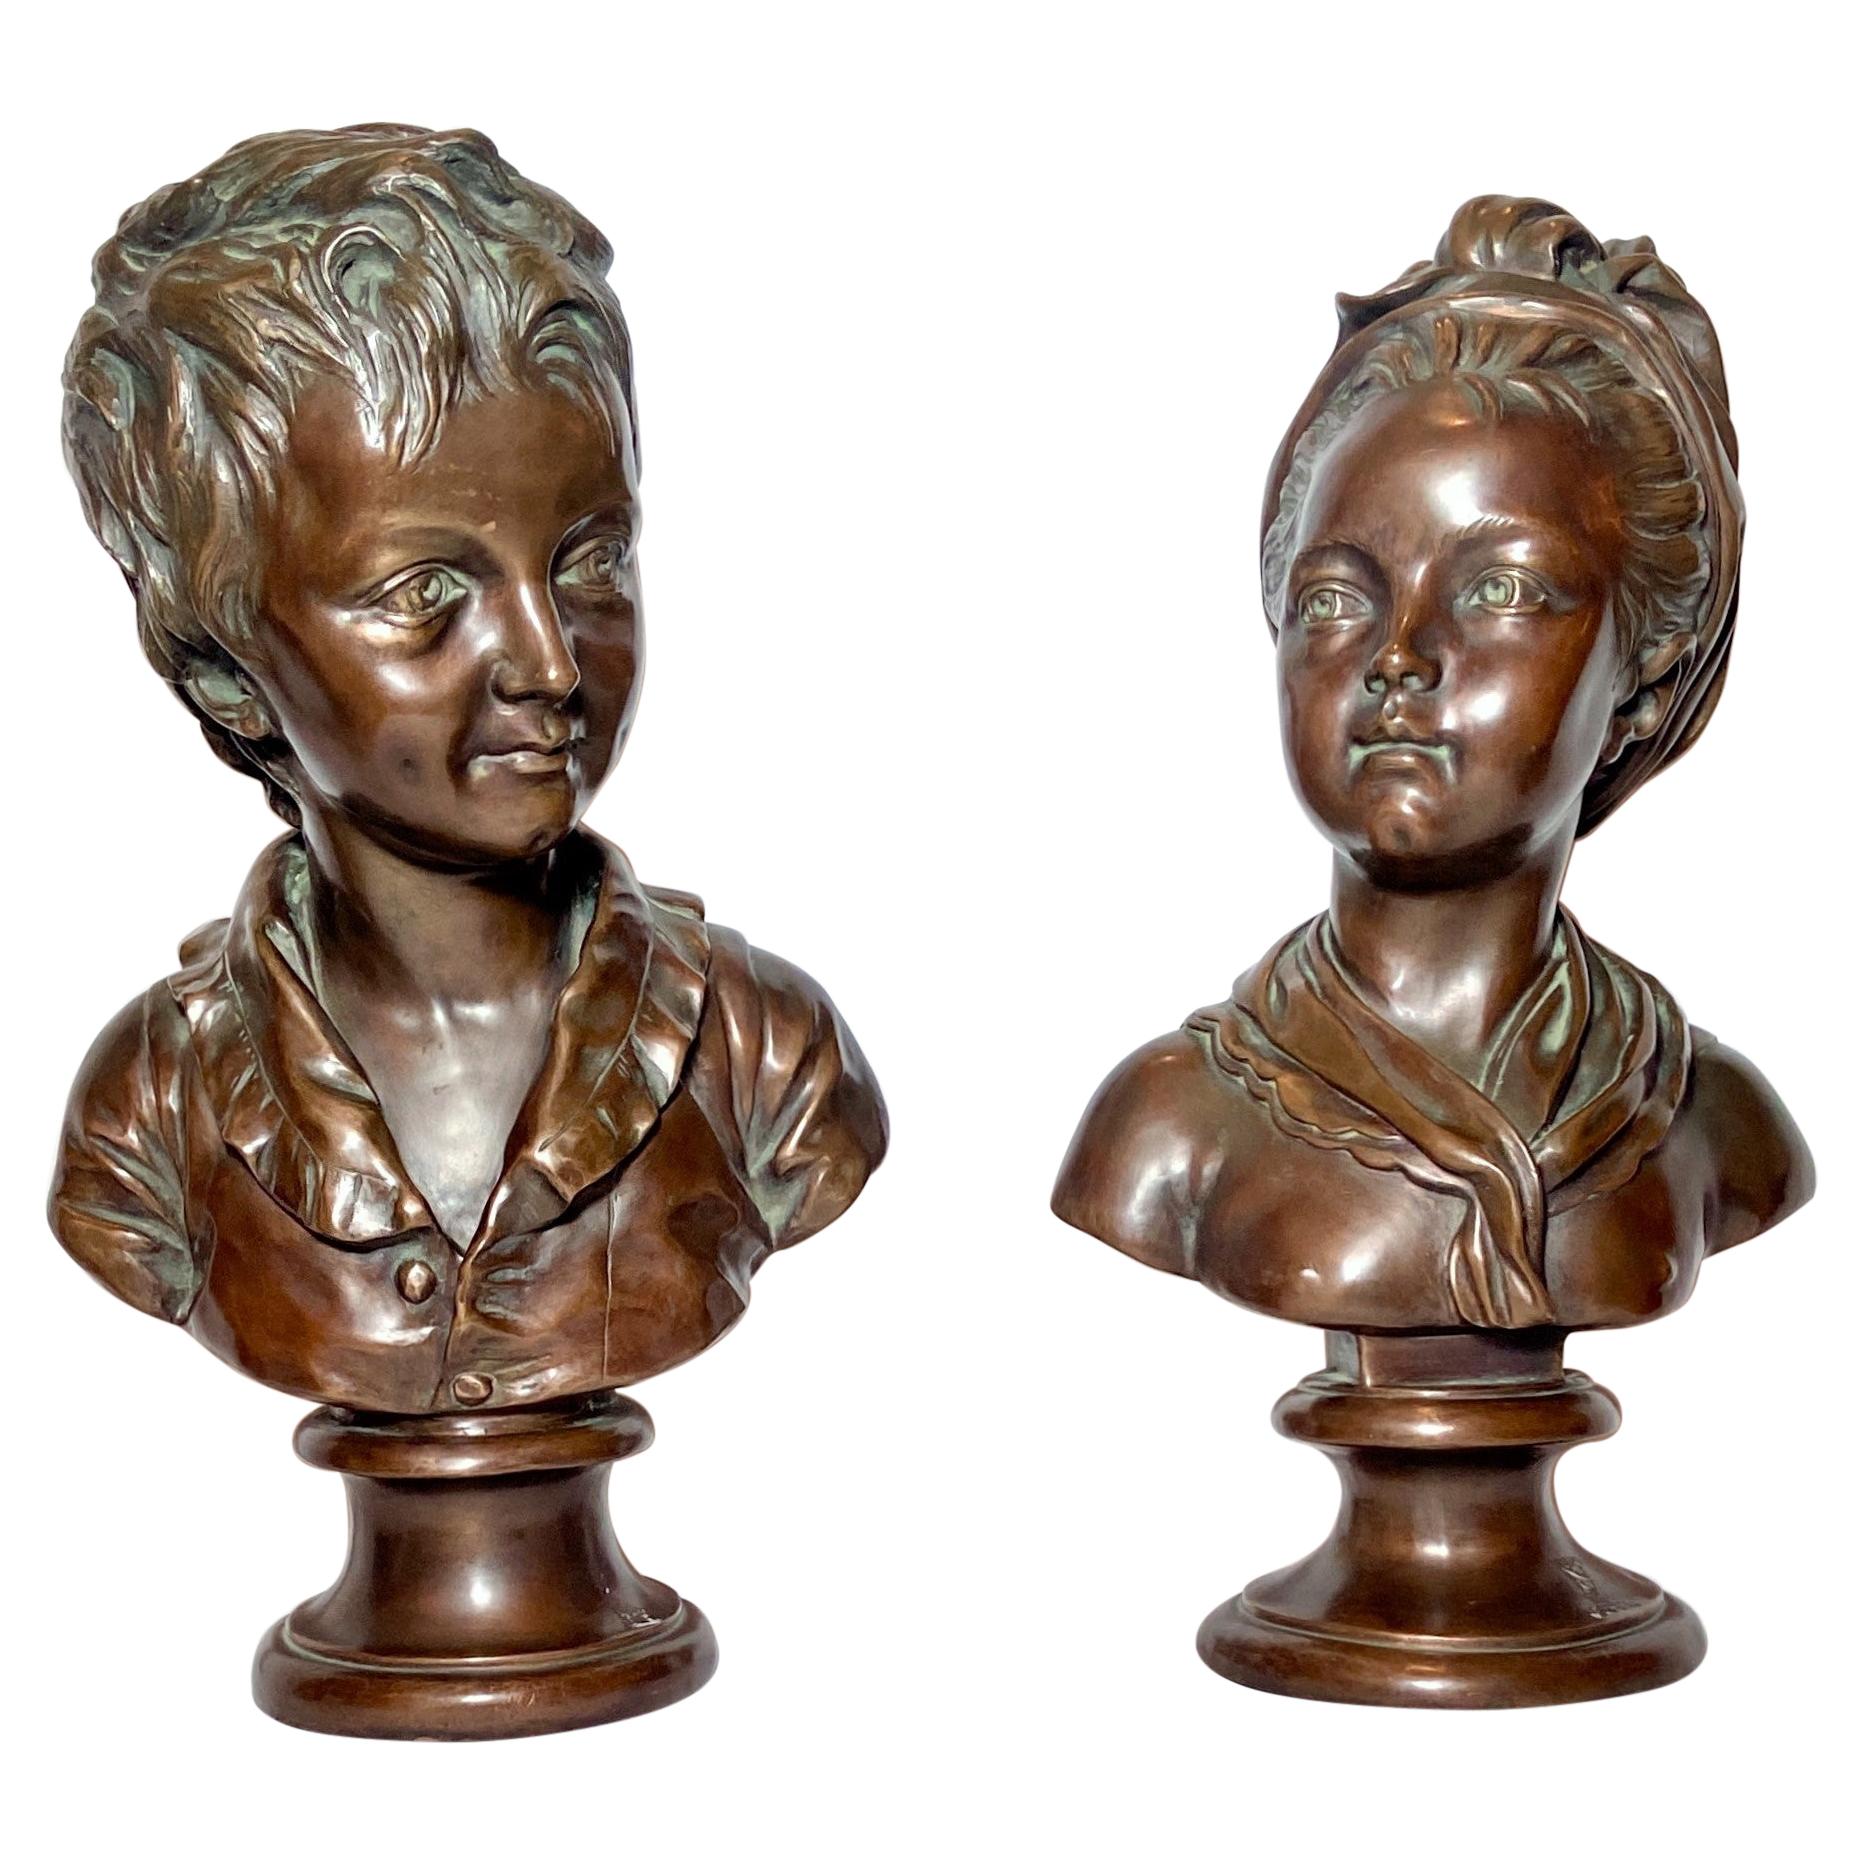 Pair Antique 19th Century French Bronze Portrait Busts of Children after Houdon